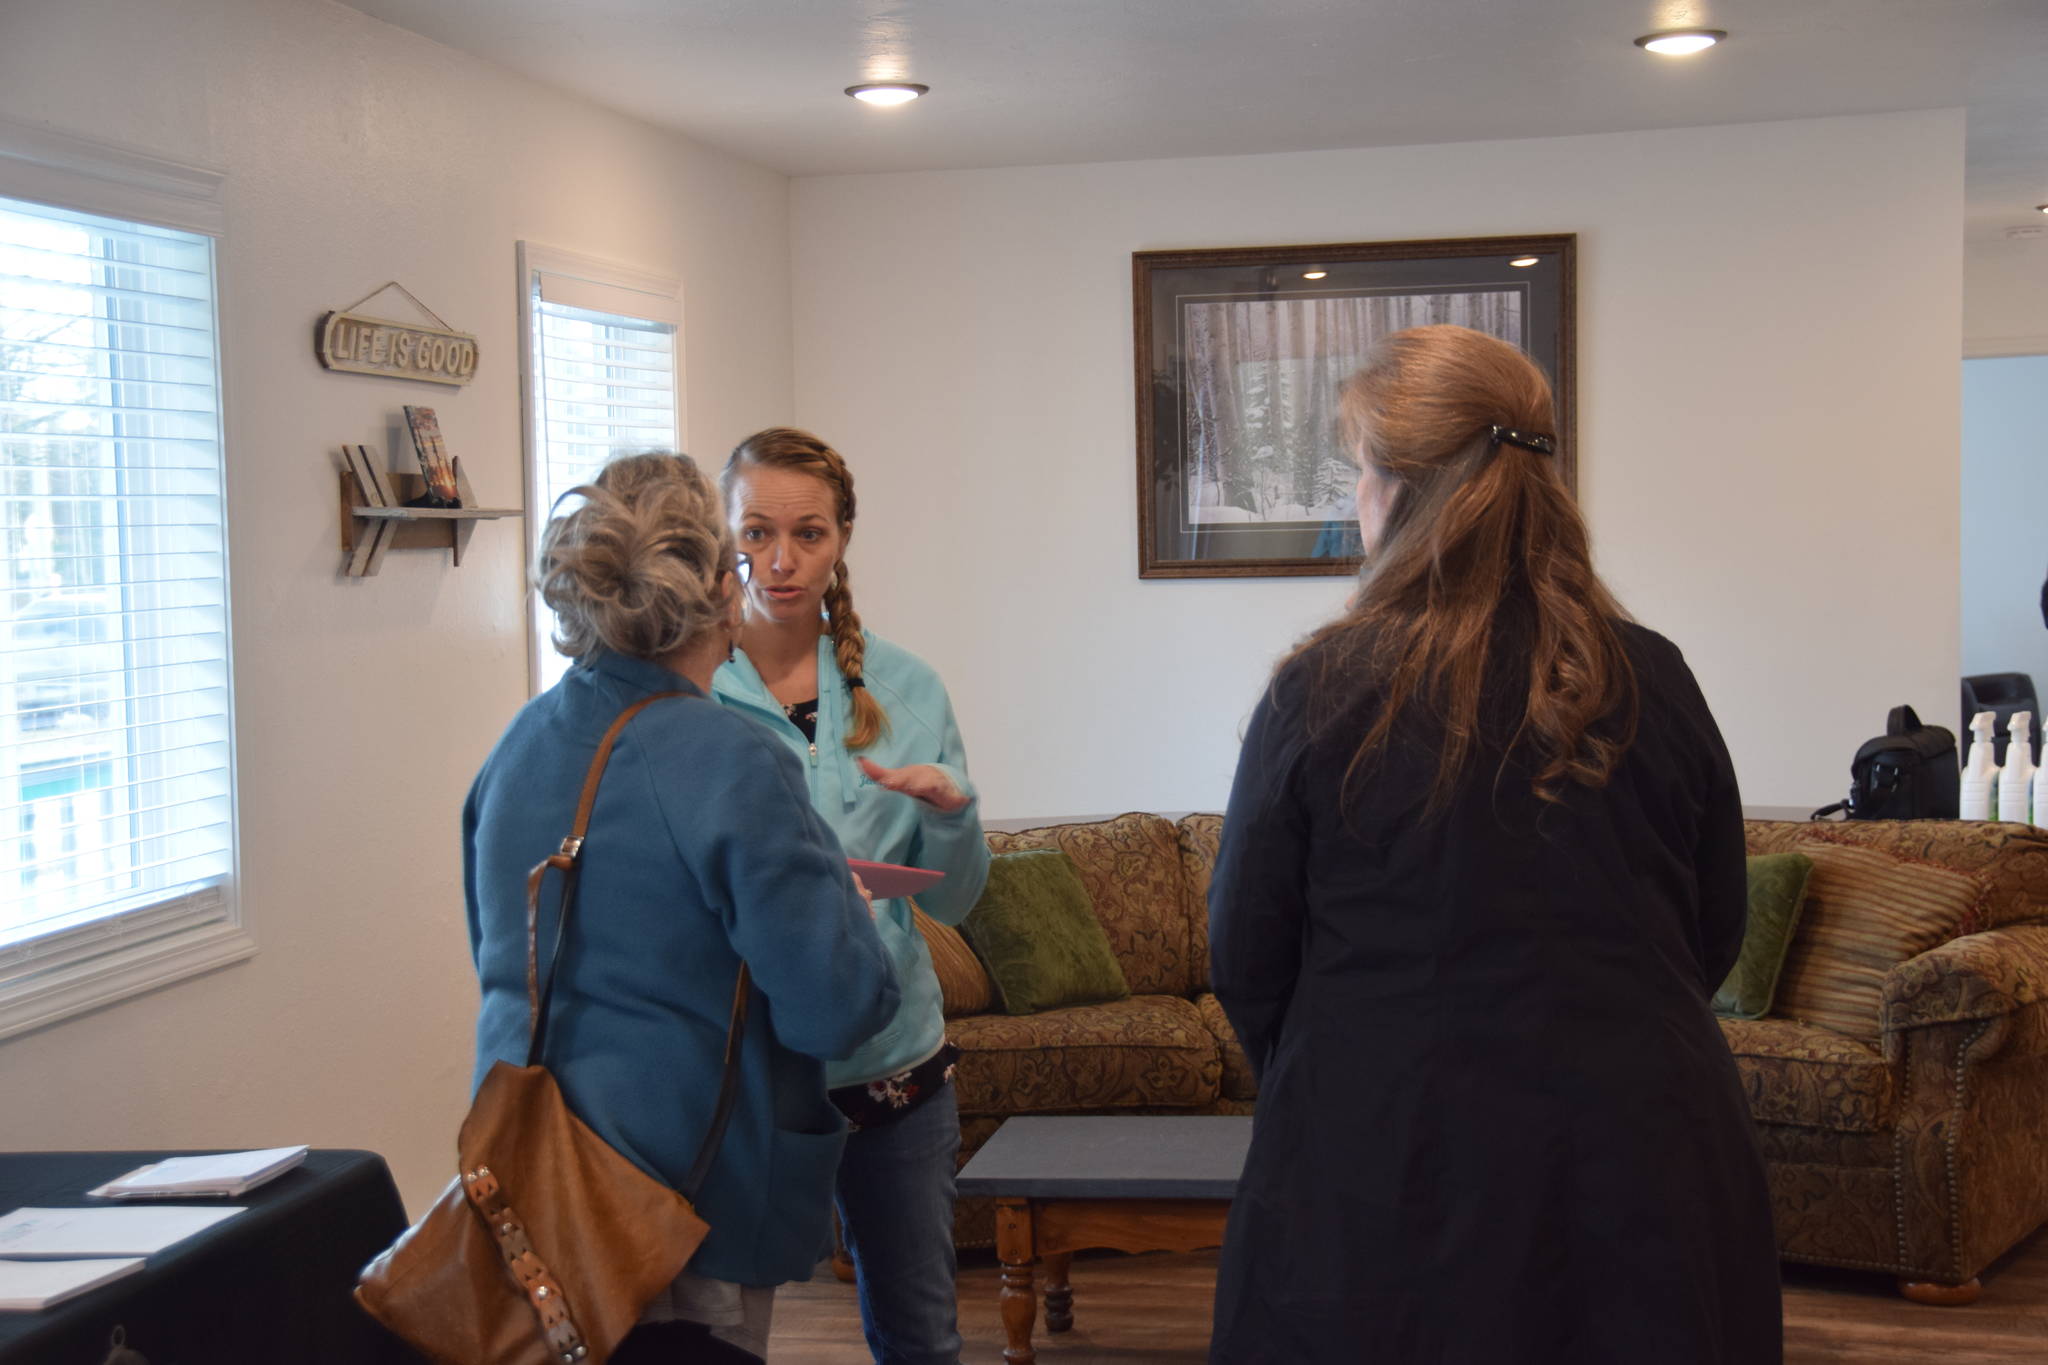 Jennifer Waller of Freedom House, center, speaks with members of the community during the opening of Freedom House’s men’s residence in Soldotna, Alaska, on March 24, 2019. (Photo by Brian Mazurek/Peninsula Clarion